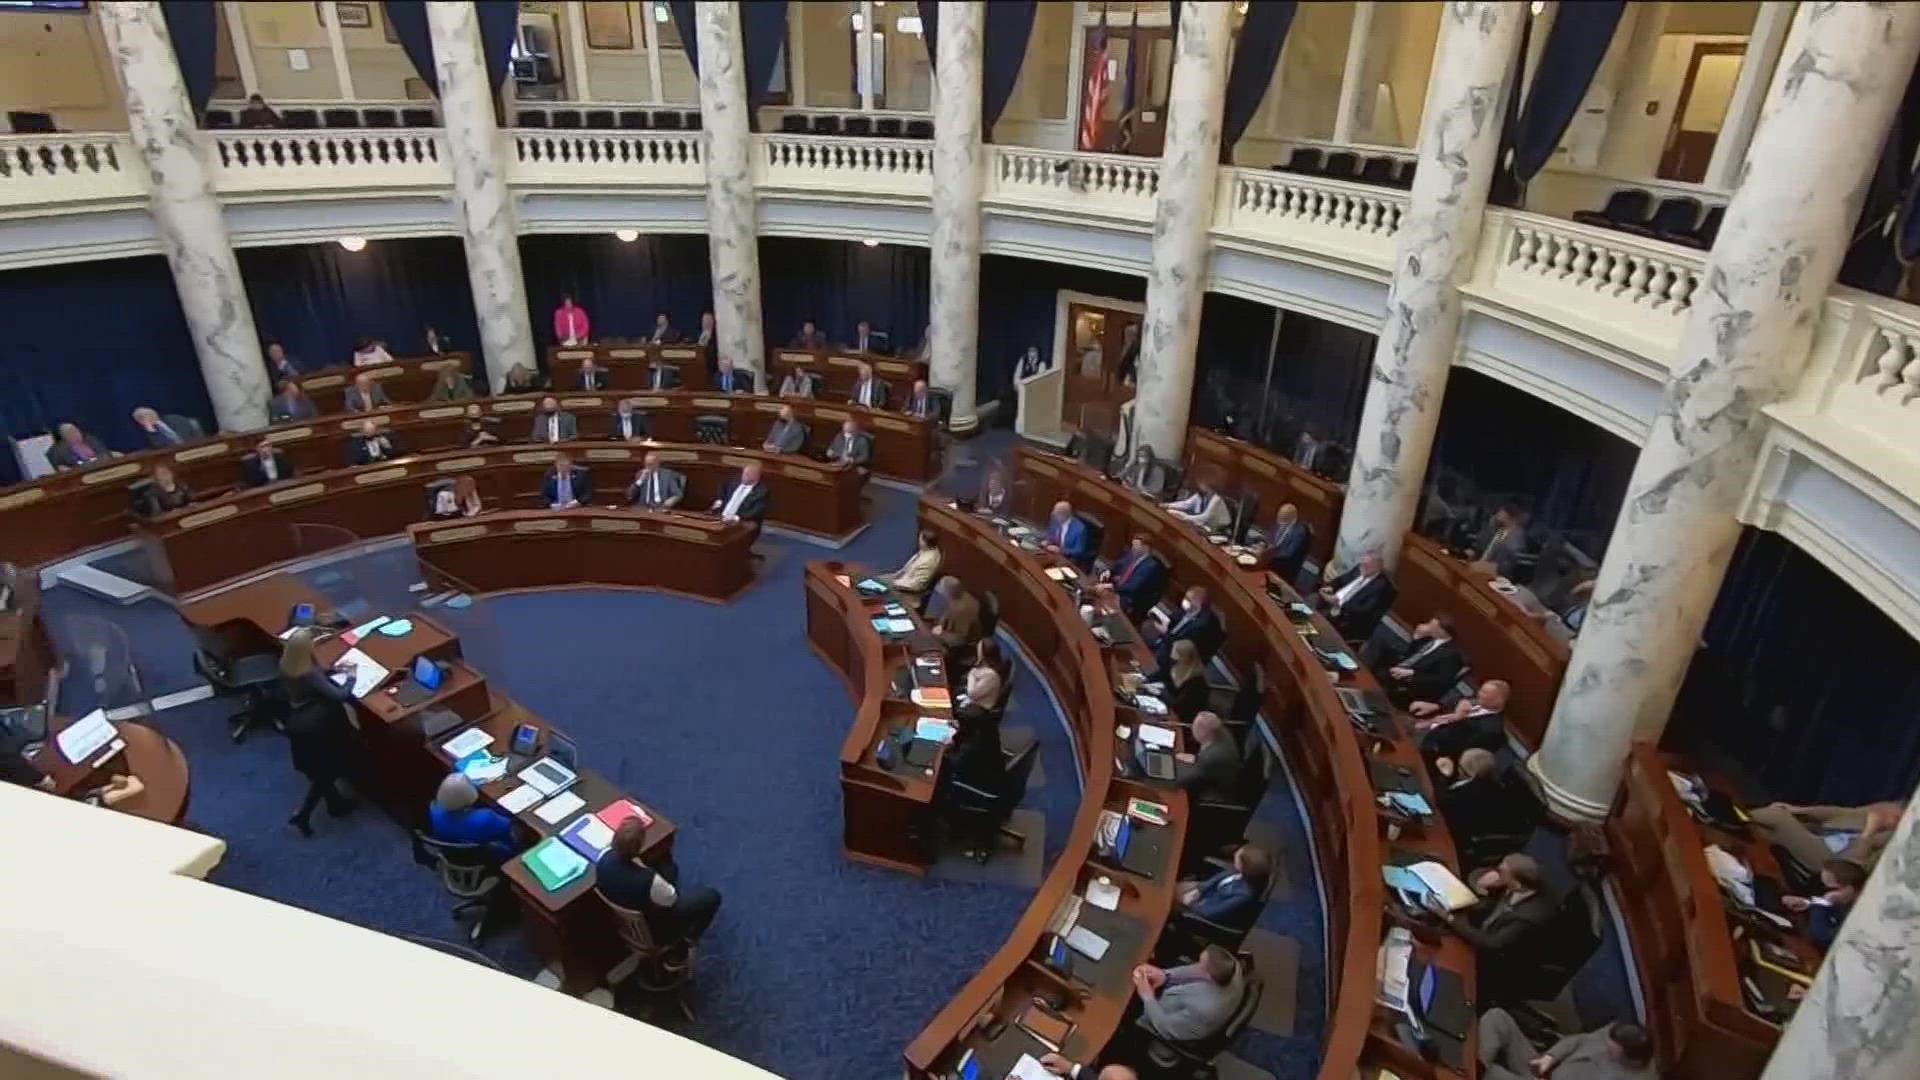 Senate Joint Resolution 102 allows the Idaho Legislature to call itself back into session without the governor's approval.